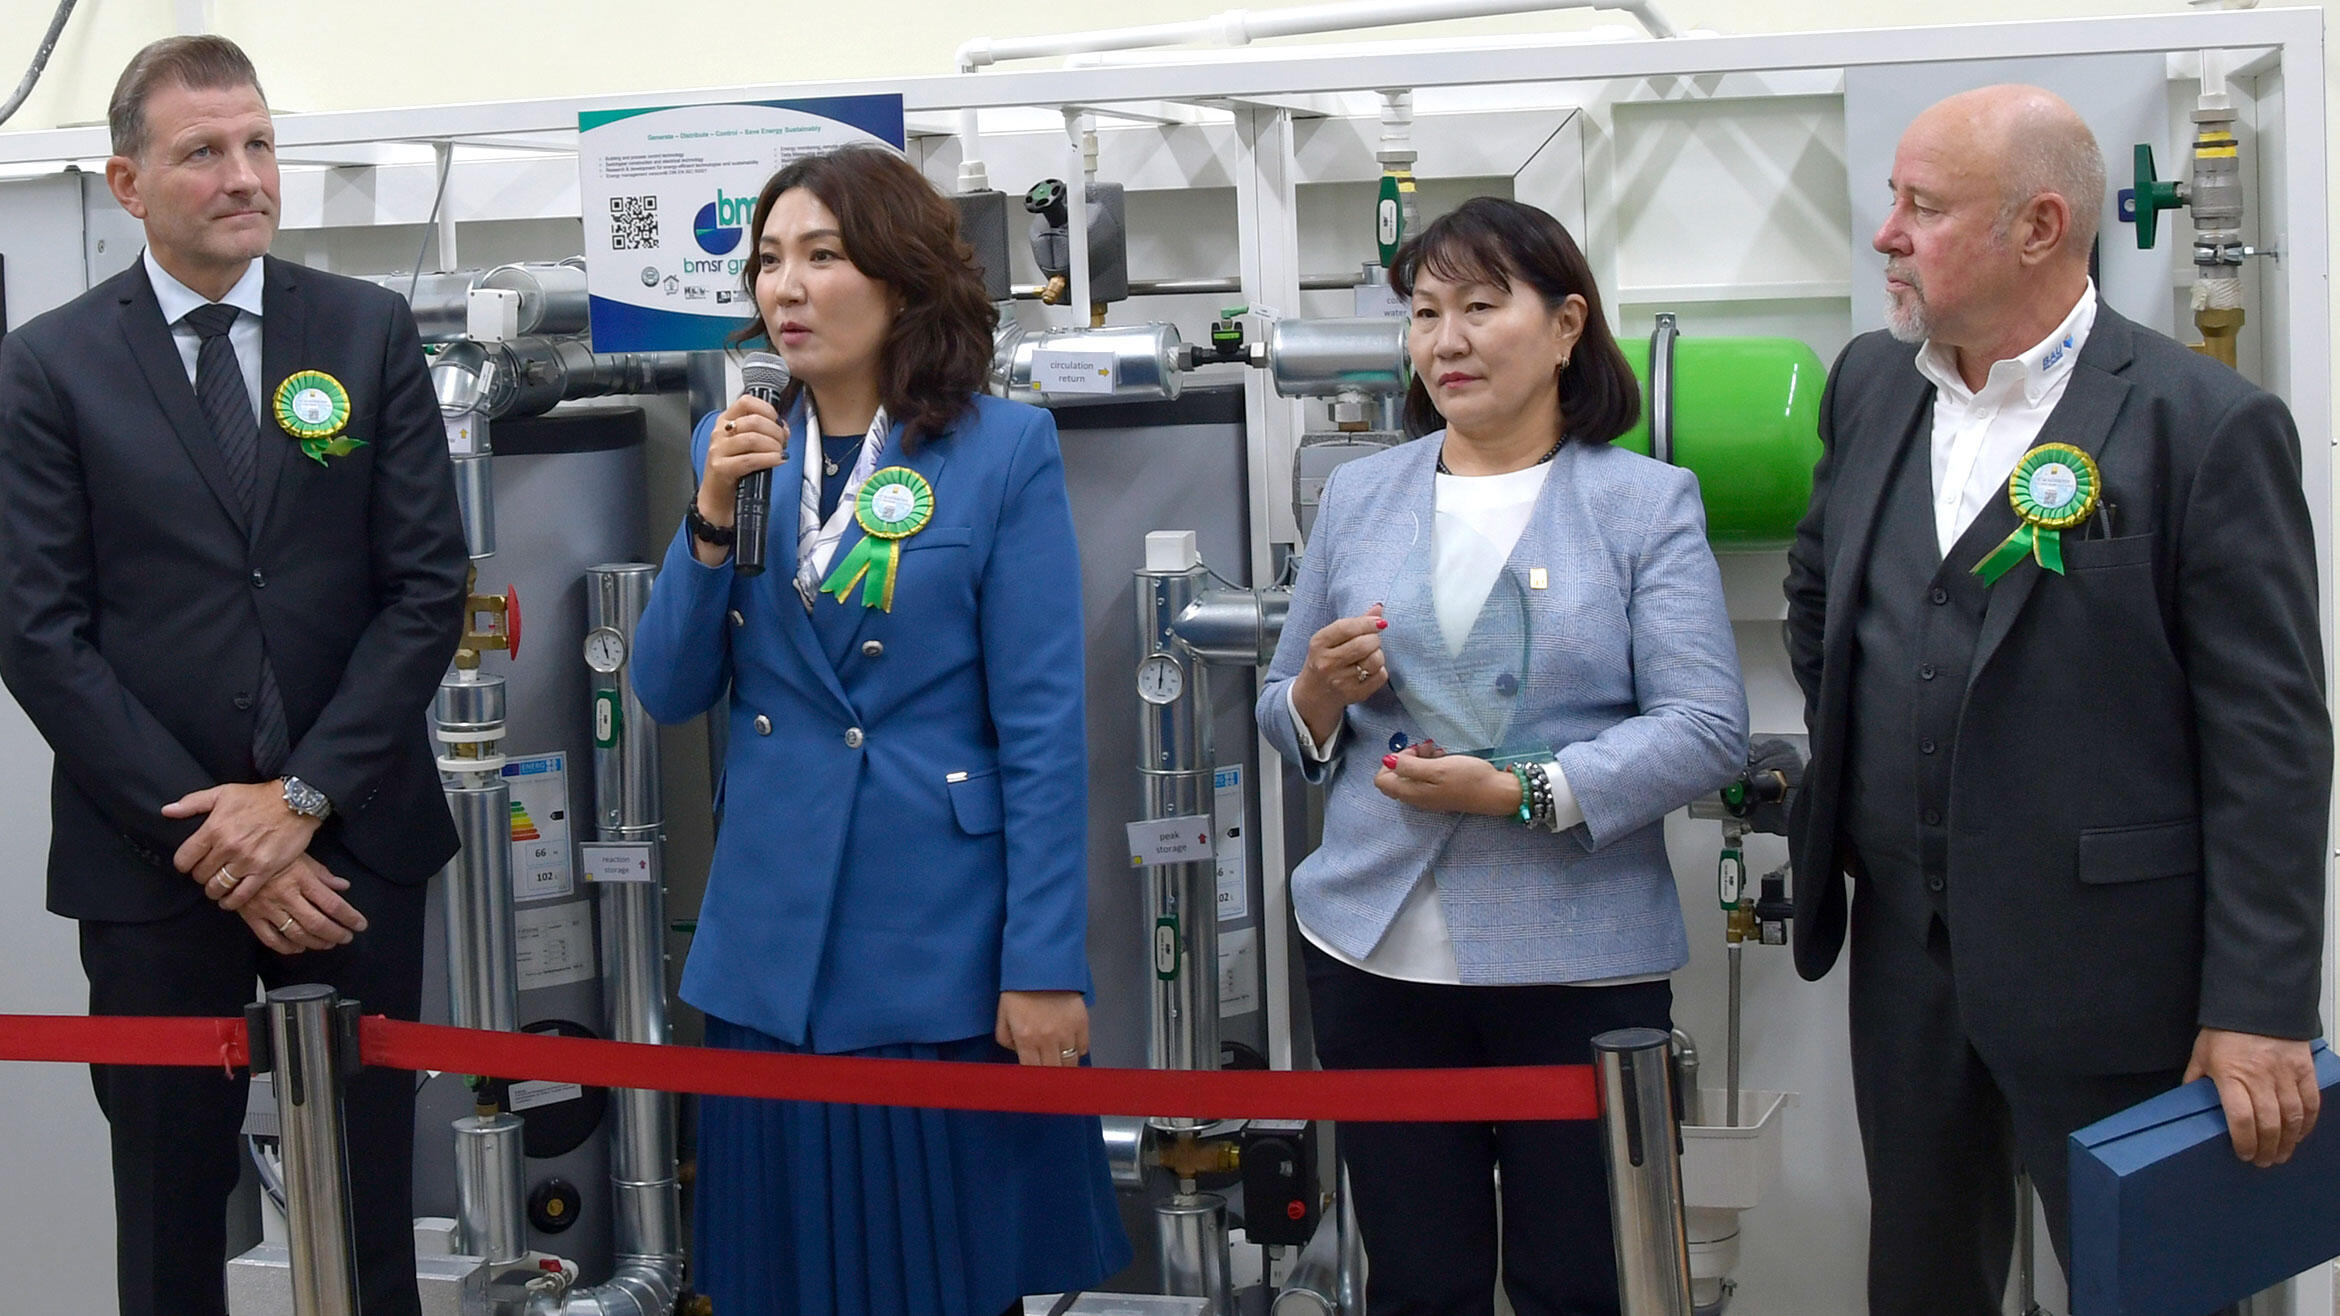 Four people in front of a drinking water treatment facility